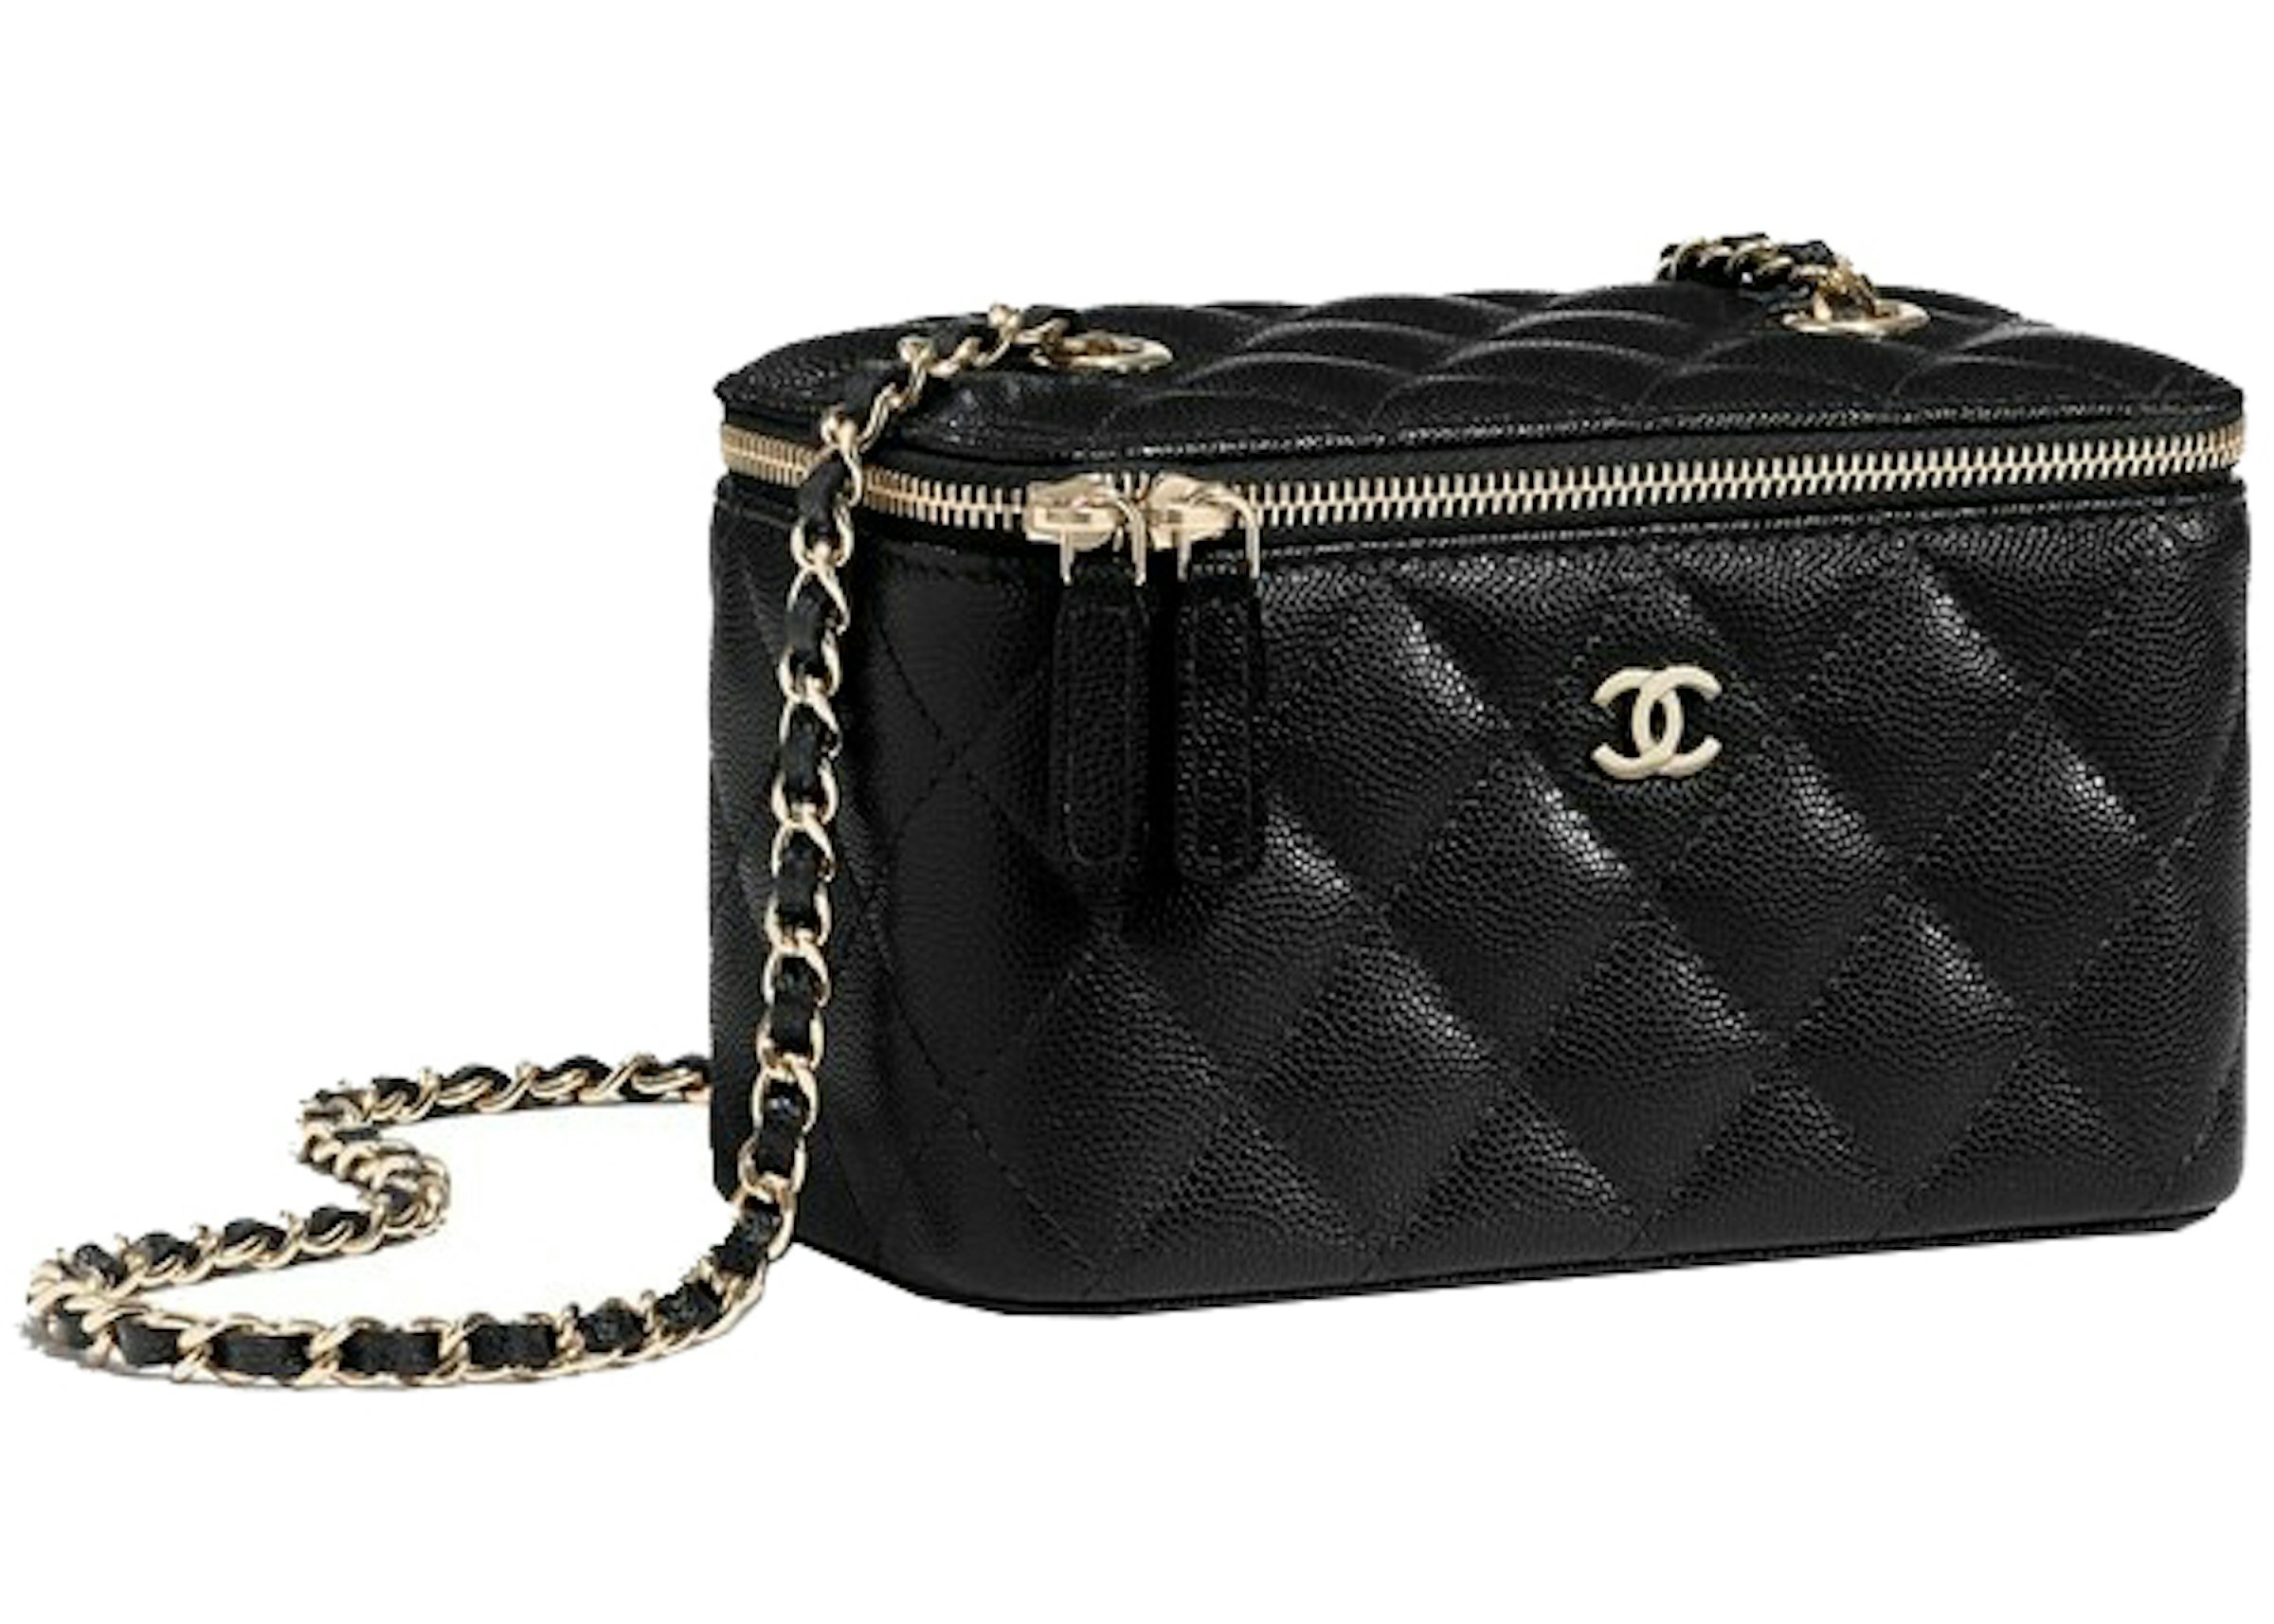 Chanel iPhone 12 Classic Case With Chain